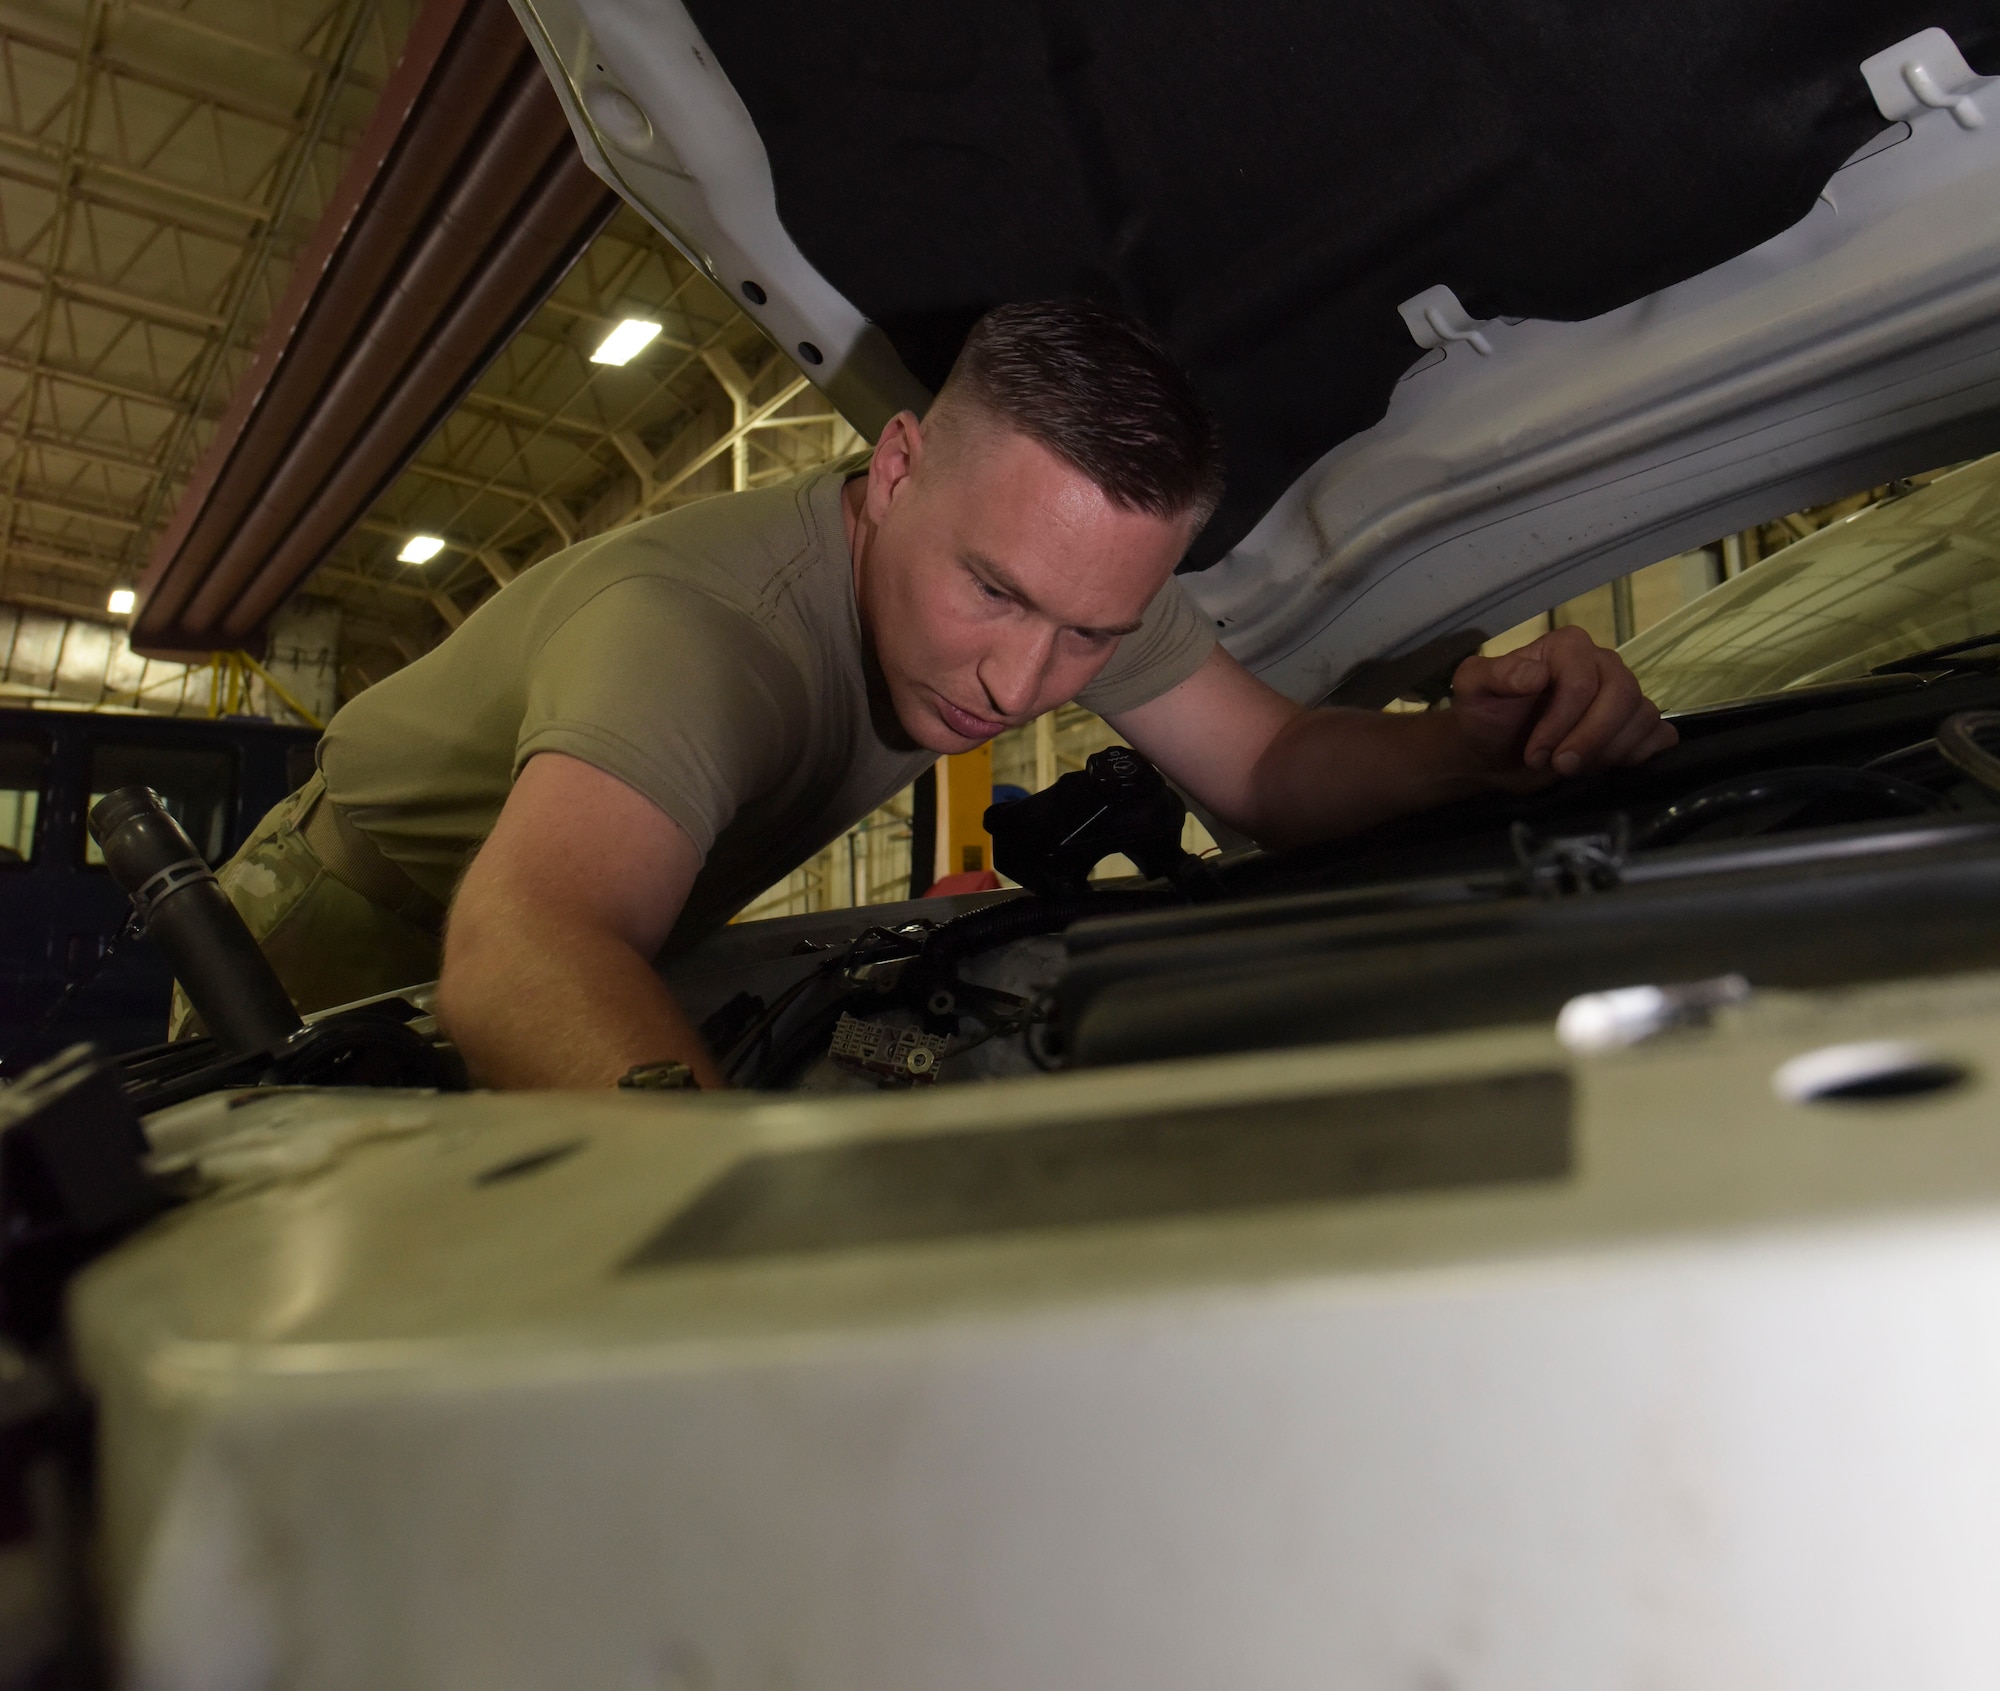 136th Logistics Readiness Squadron, Texas Air National Guardsmen Tech. Sgt. Andrew Merrill, fire truck and refueler maintainer, works on a 100 LRS assigned vehicle at RAF Mildenhall, England, July 30, 2019. Some of these guardsmen are full-time at their home station at Naval Air Station Joint Reserve Base Fort Worth, Texas, and are able to bring new skill sets here. (U.S. Air Force photo by Senior Airman Alexandria Lee)